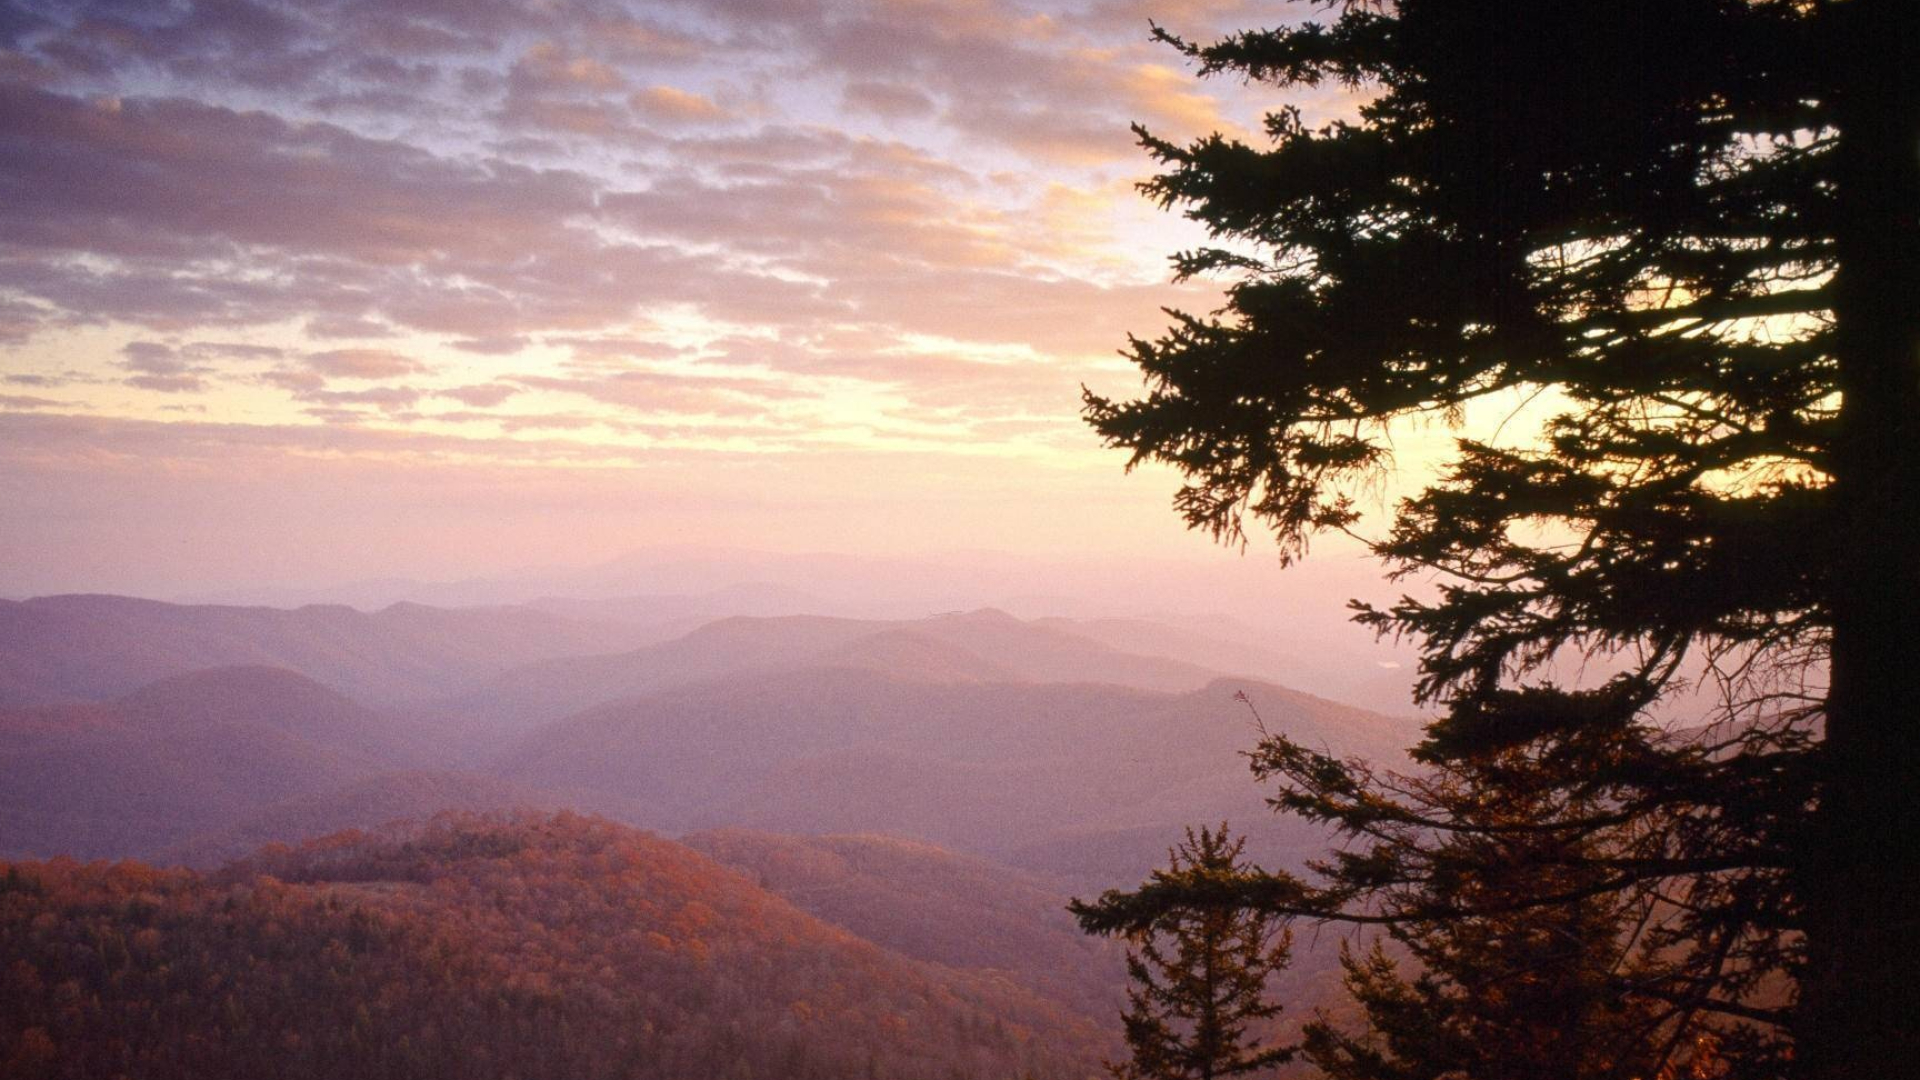 North Carolina: The Great Smoky Mountains National Park spans the border with Tennessee. 1920x1080 Full HD Wallpaper.